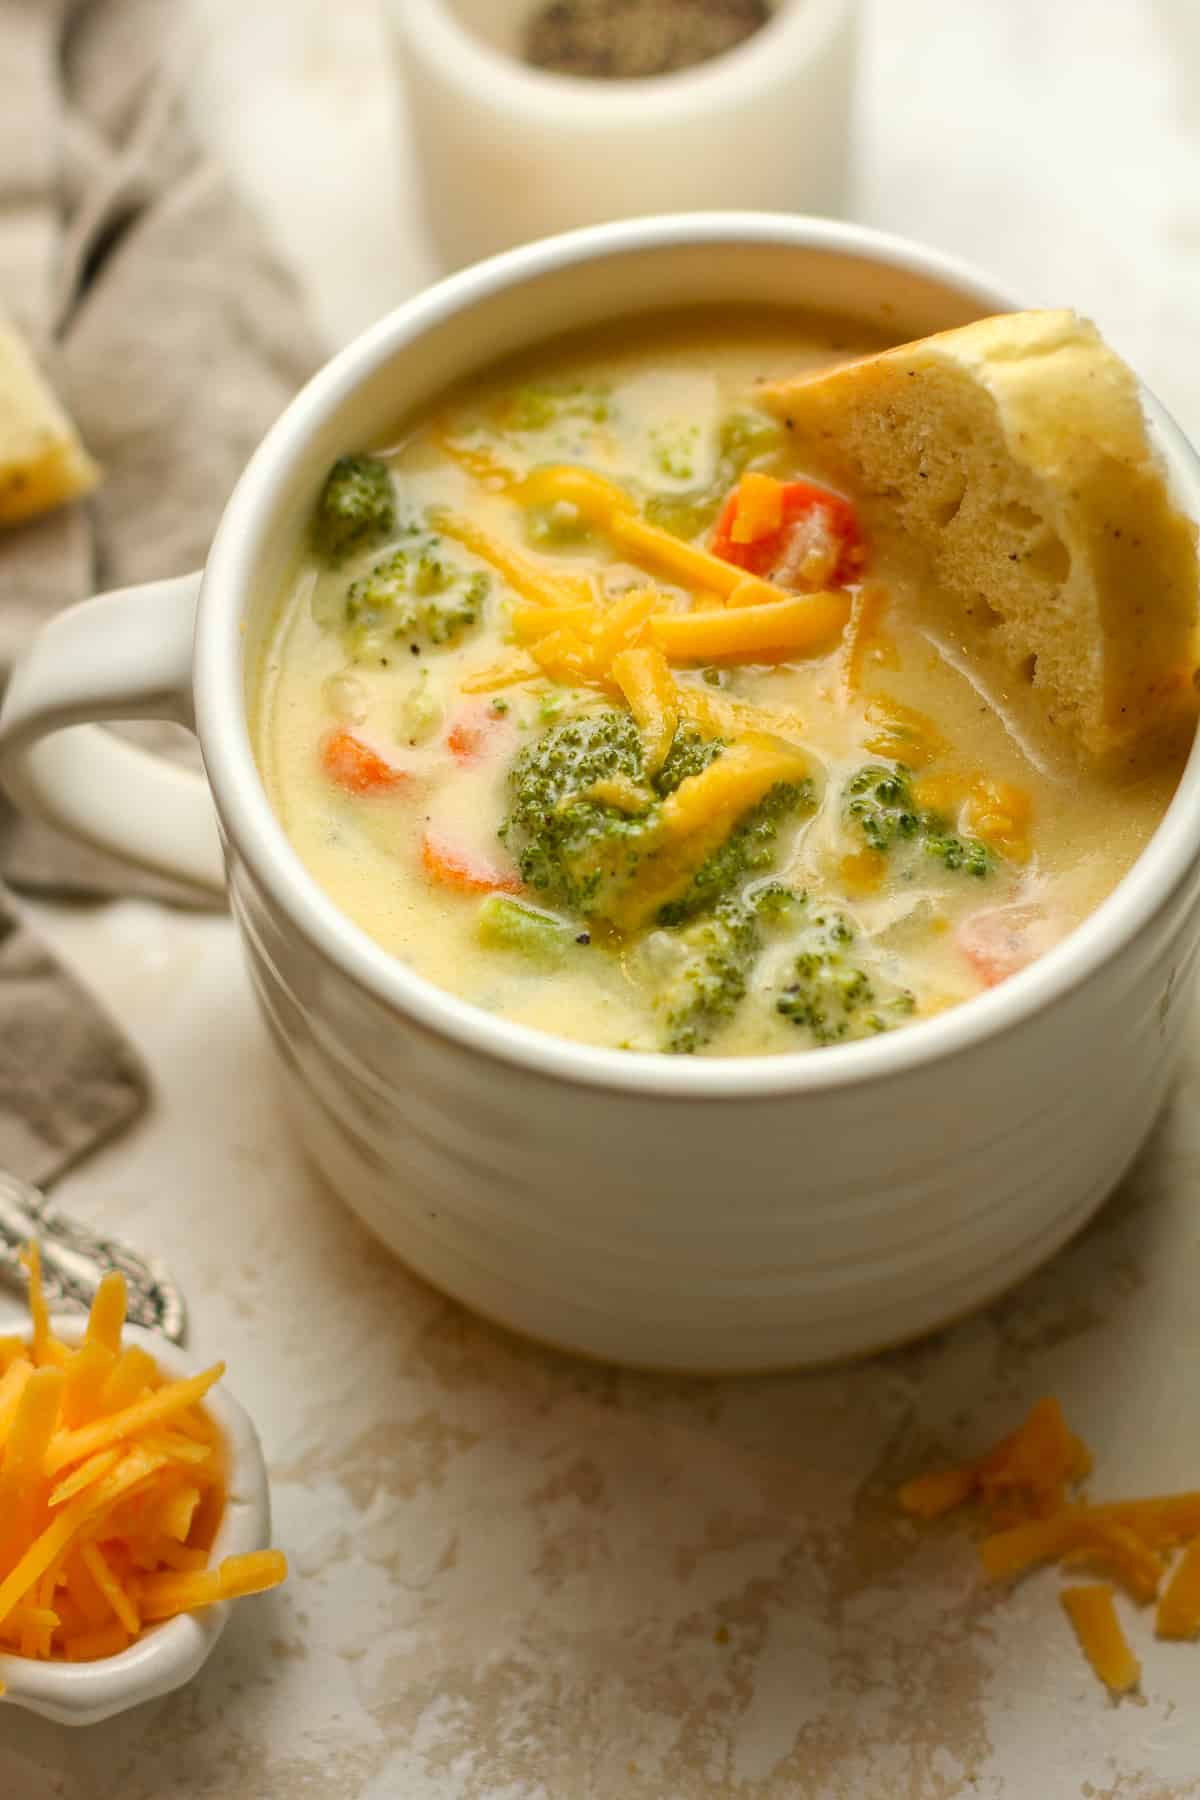 A large mug of cheddar broccoli soup with shredded cheese on top.